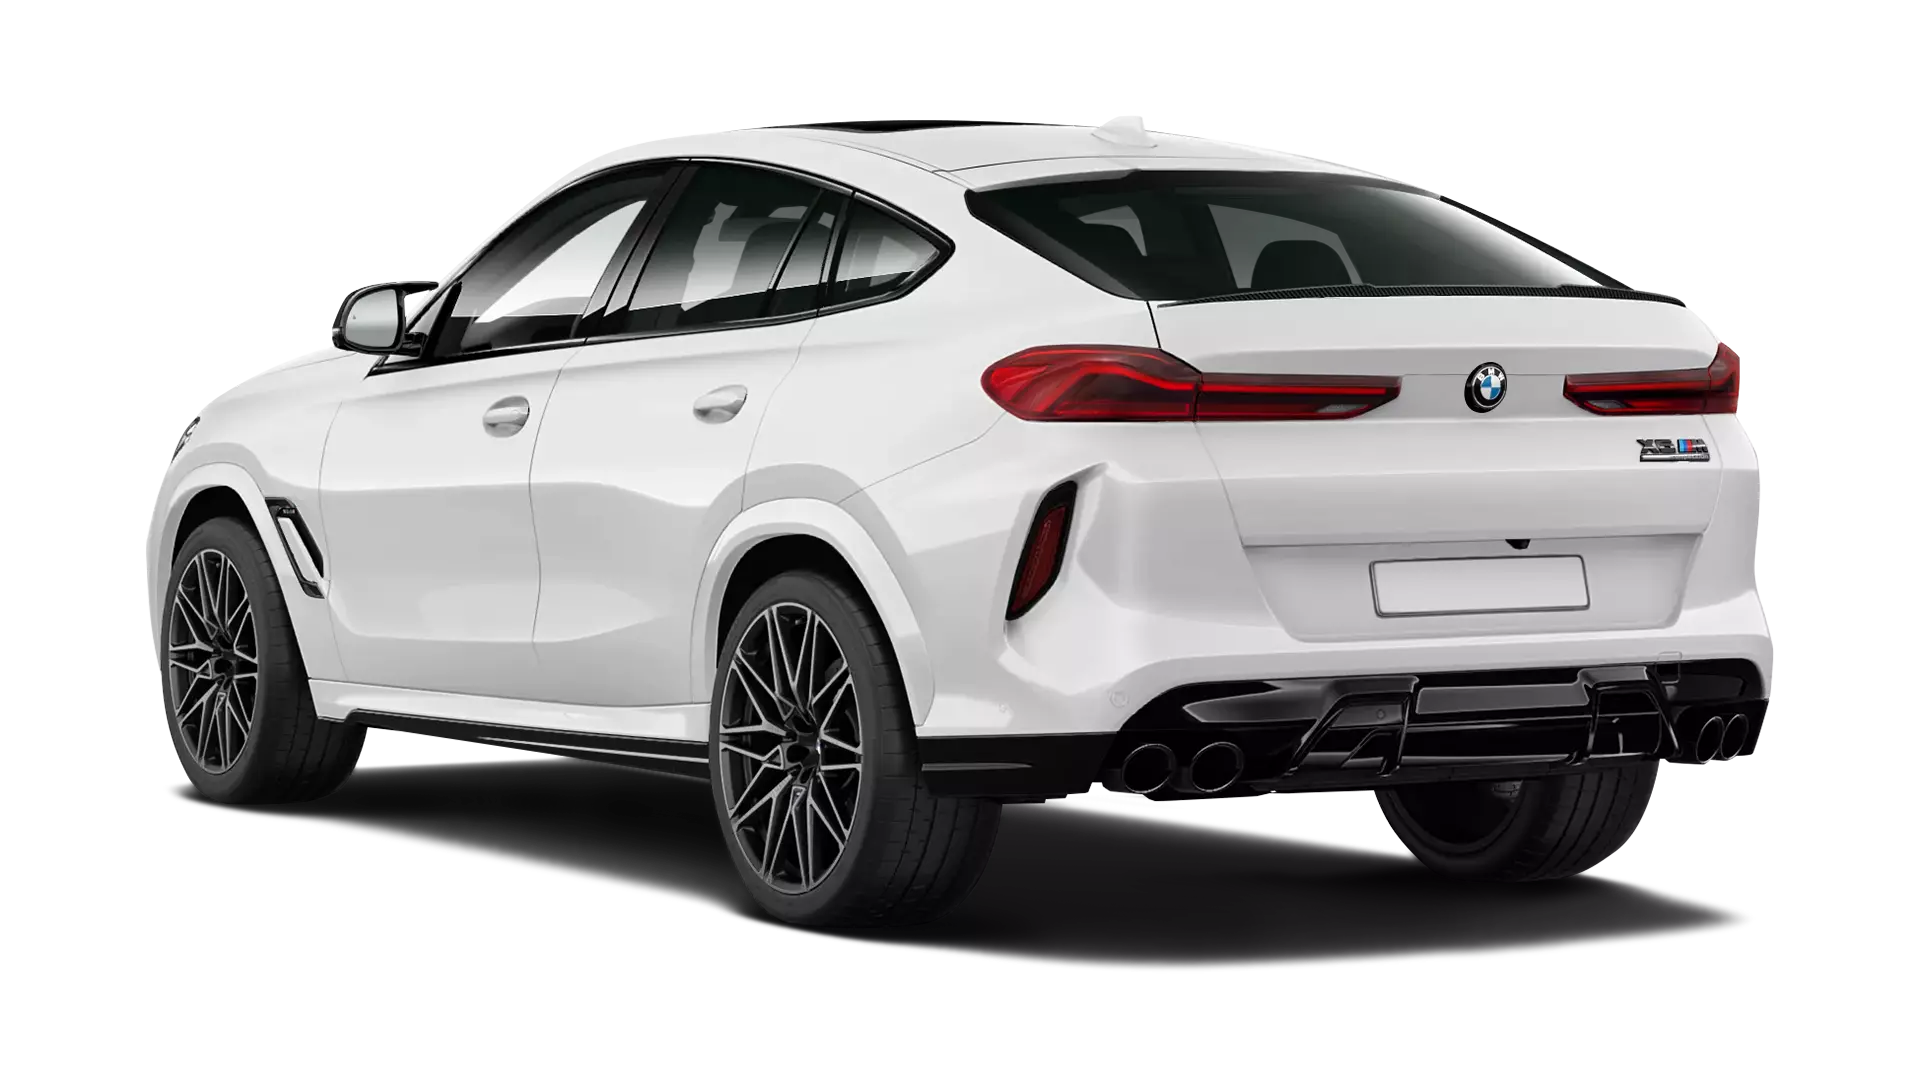 BMW X6M F96 stock rear view in Mineral White color